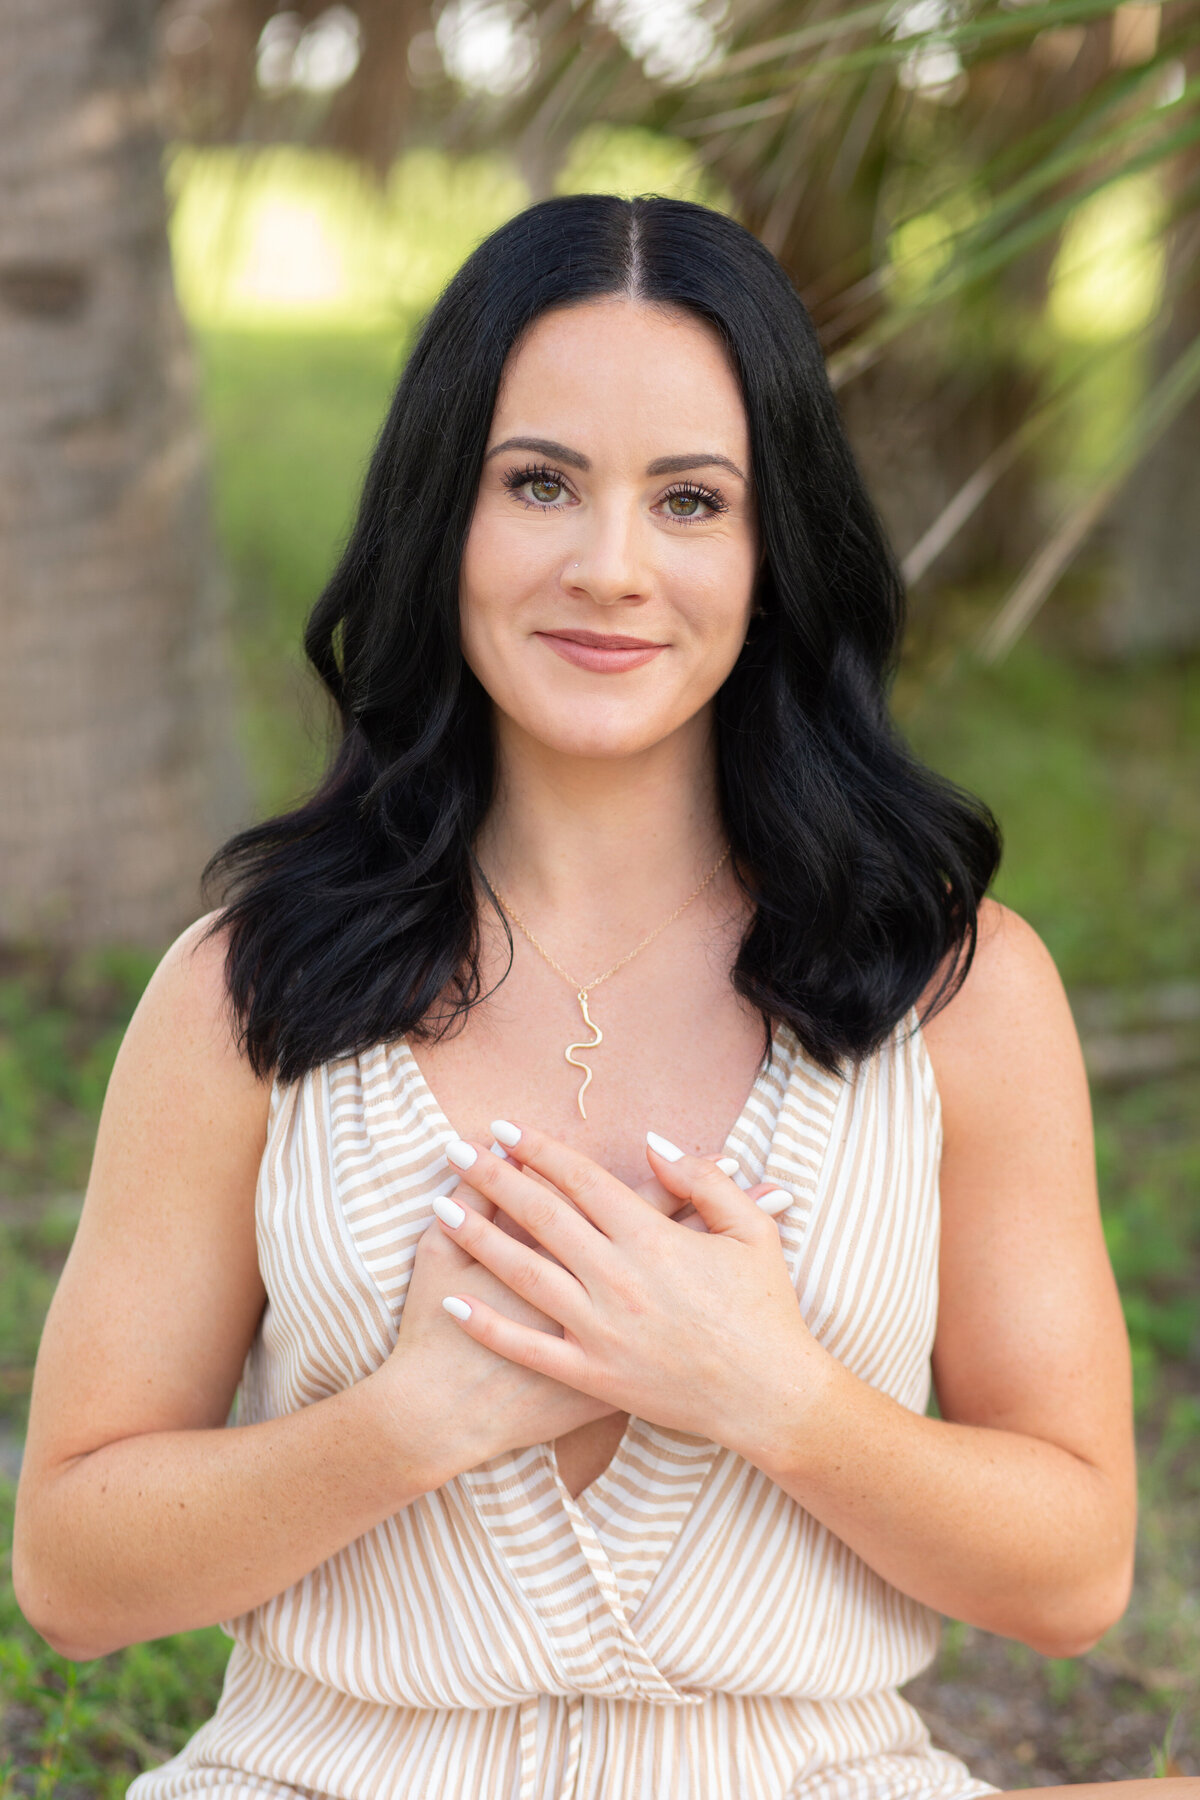 Meaghan-Health-Coach-Brand-Photography-St-Pete-02